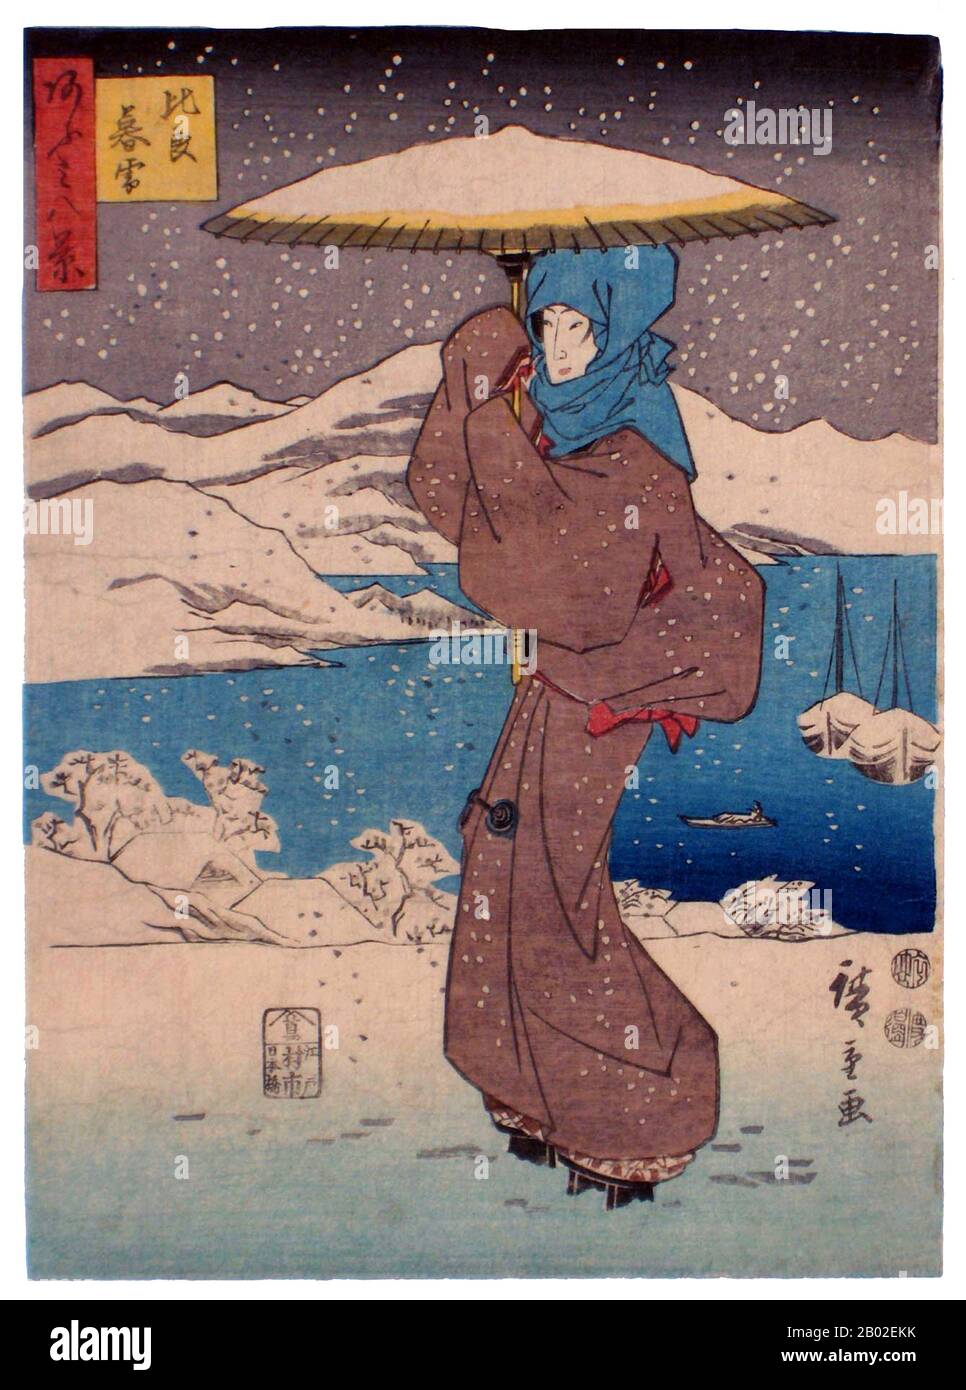 Utagawa Hiroshige (1797 – October 12, 1858) was a Japanese ukiyo-e artist, and one of the last great artists in that tradition. He was also referred to as Andō Hiroshige, and by the art name of Ichiyūsai Hiroshige.  Among many masterpieces, Hiroshige is particularly remembered for 'The Sixty-nine Stations of the Kisokaidō' (1834–1842) and 'Thirty-six Views of Mount Fuji' (1852–1858). Stock Photo